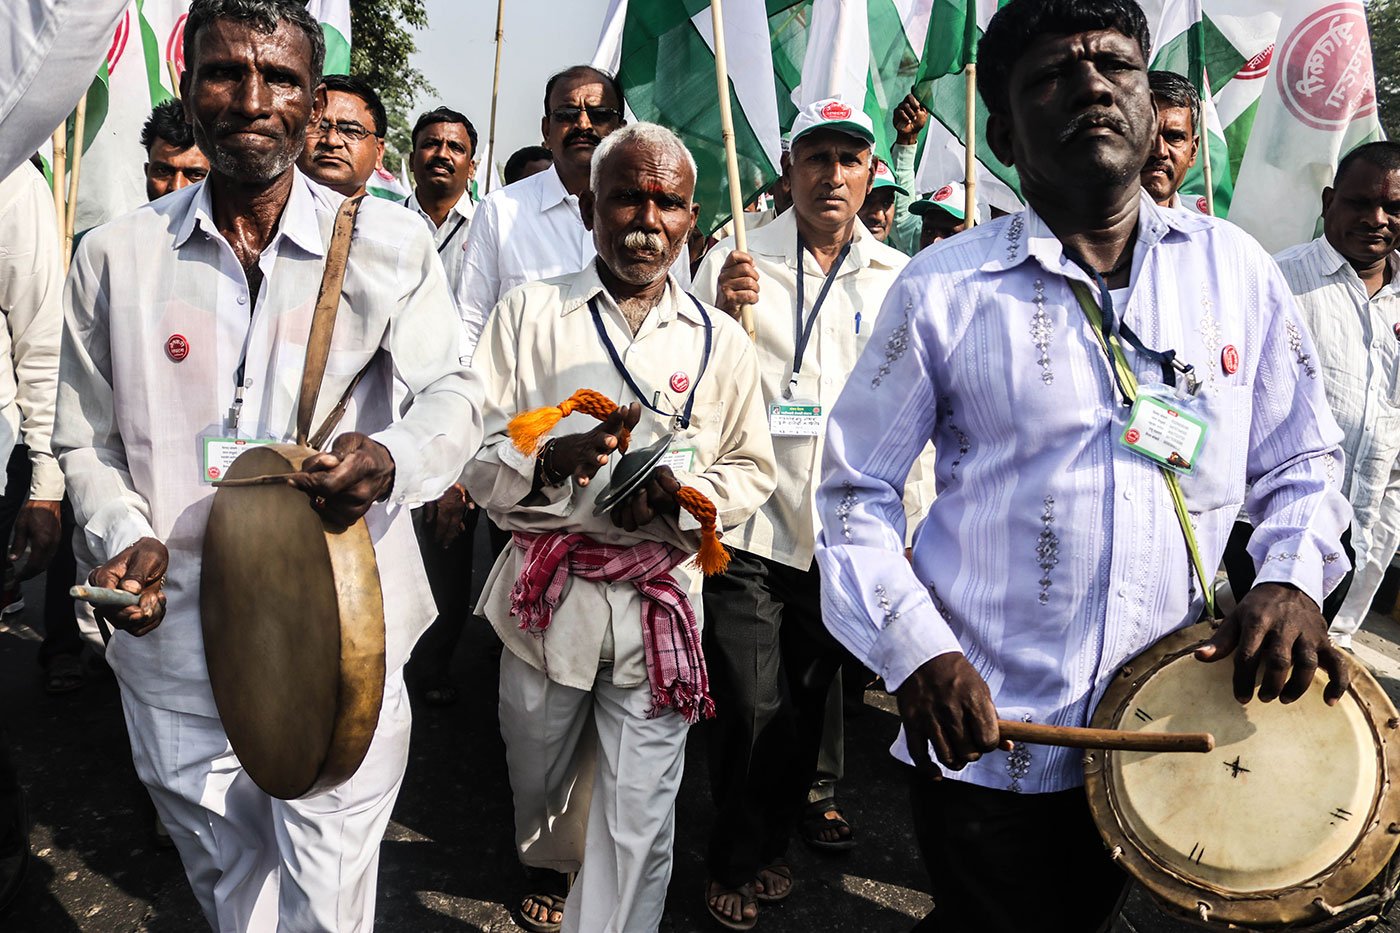 Farmers from the villages of Kolhapur district in Maharashtra playing traditional musical instruments amidst the March